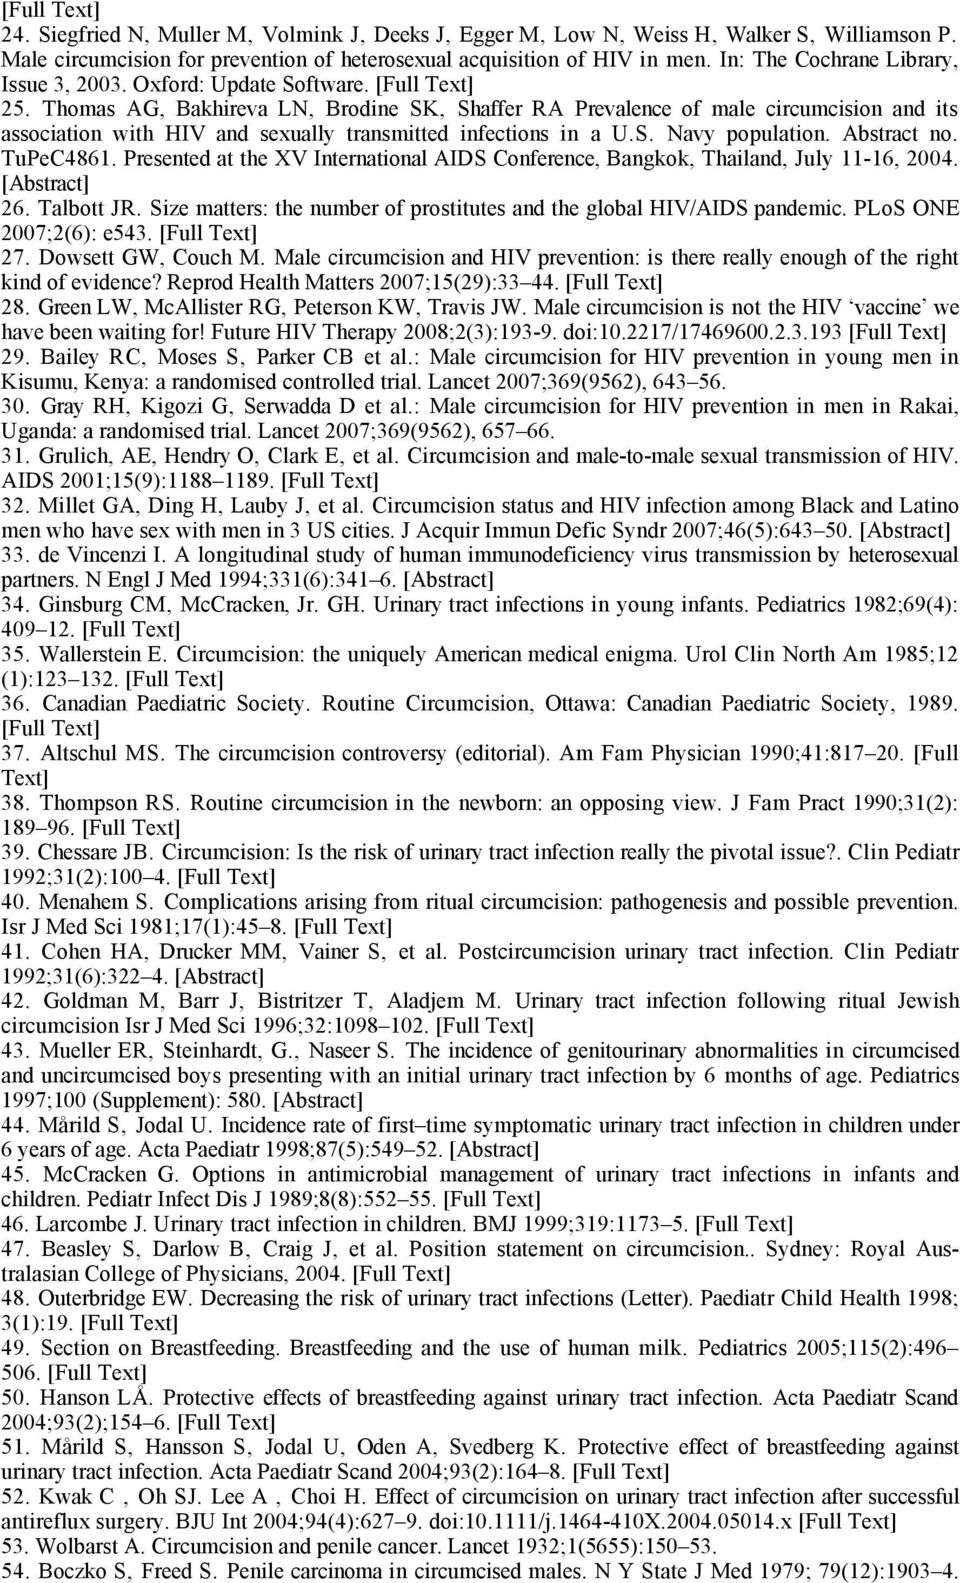 Thomas AG, Bakhireva LN, Brodine SK, Shaffer RA Prevalence of male circumcision and its association with HIV and sexually transmitted infections in a U.S. Navy population. Abstract no. TuPeC4861.